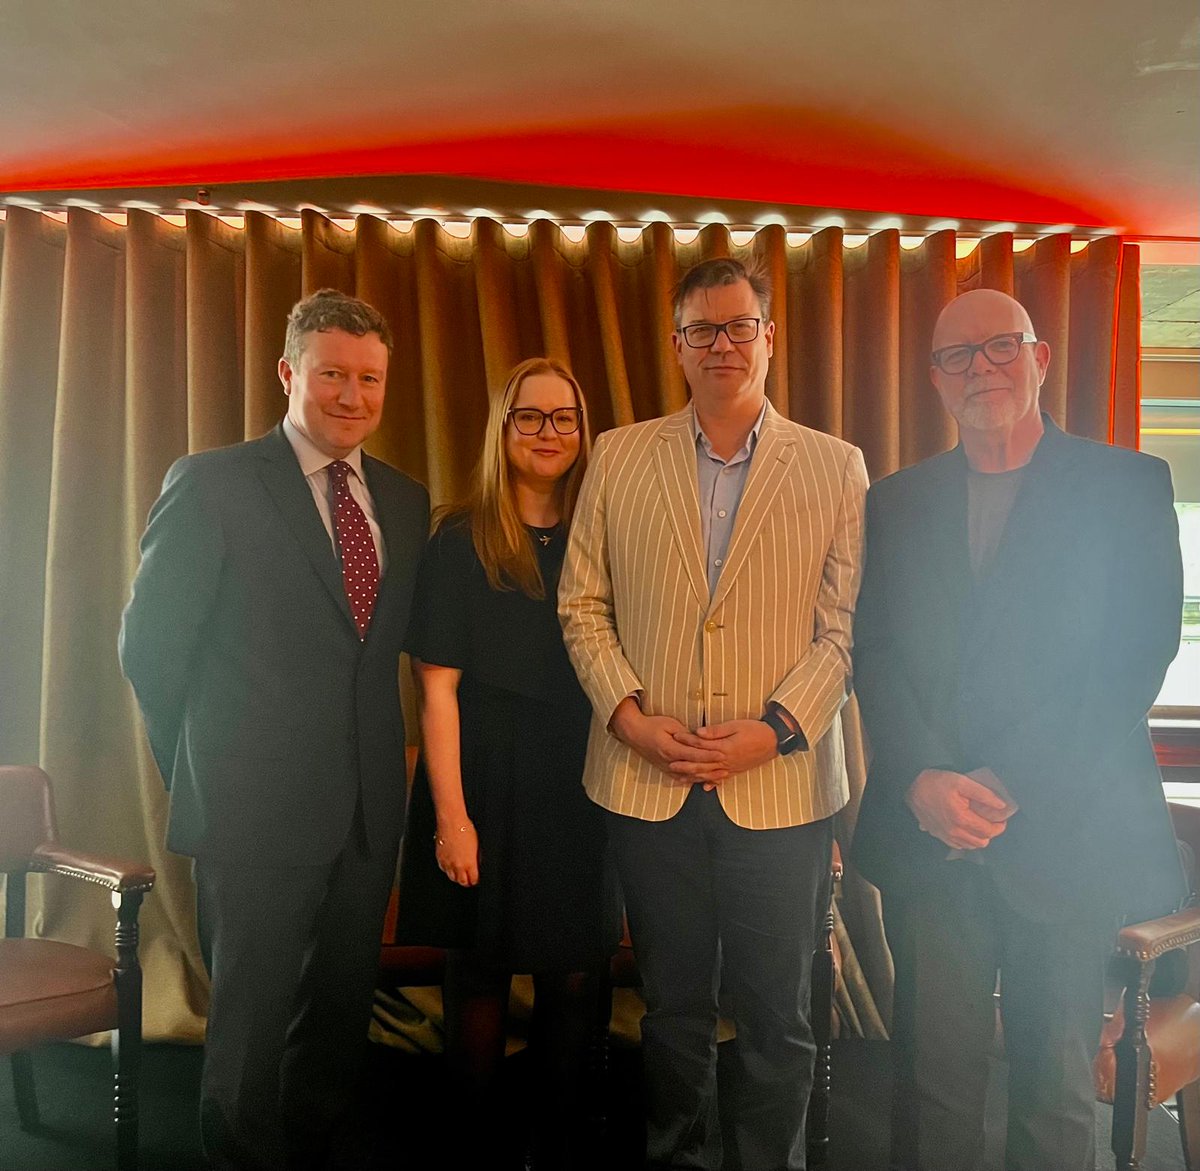 We had a very interesting morning at The Irish Times’ live Inside Politics breakfast event at Medley. Host Hugh Linehan was joined by Cliff Young from Ipsos, Pat Leahy and Jennifer Bray for an insightful discussion in this year of elections. Tune into the Inside Politics podcast